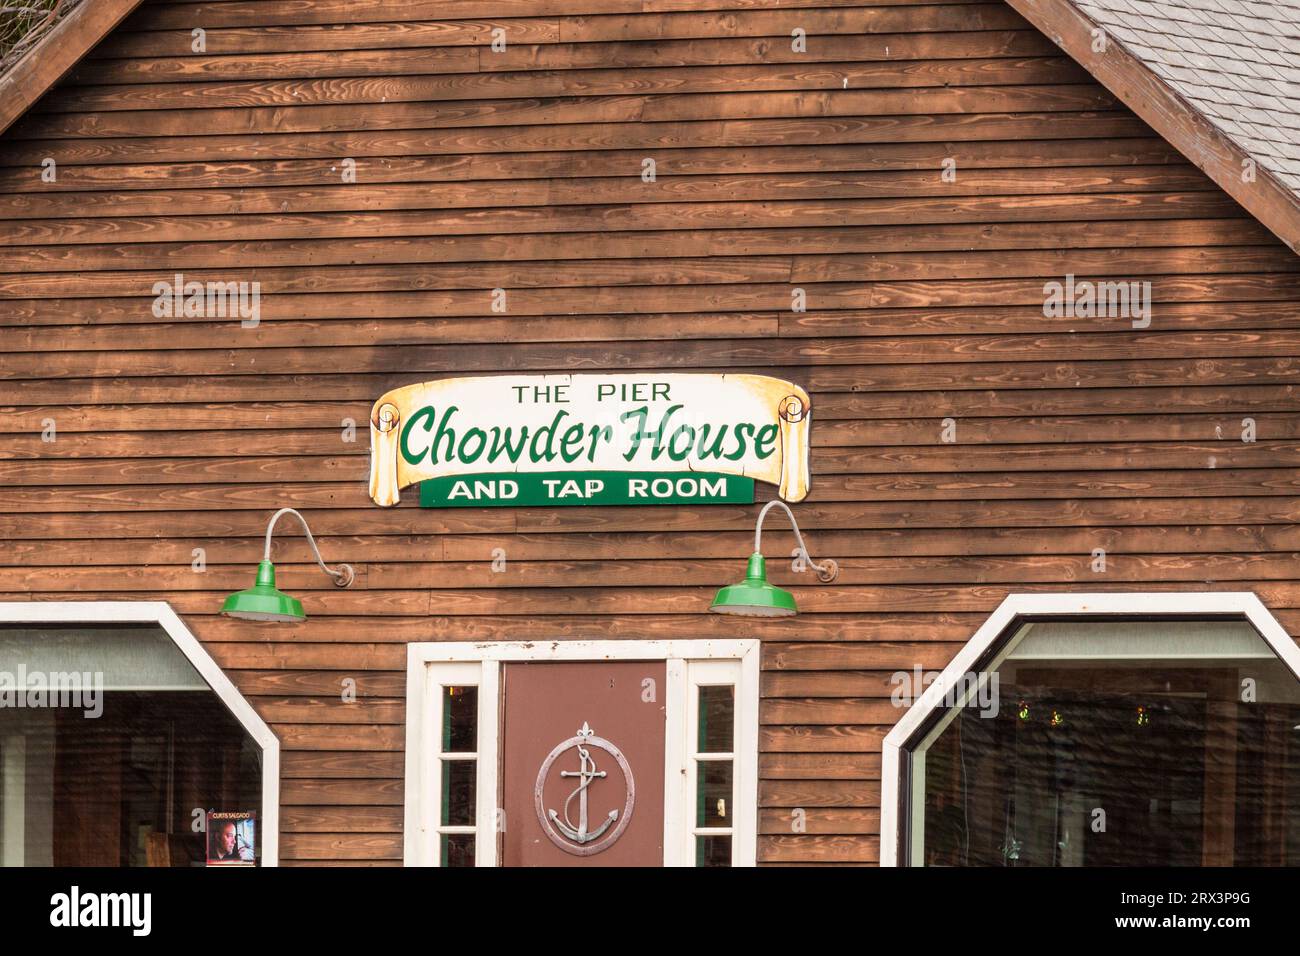 Sign on Chowder House and Tap Room adjacent to the Pier at Point Arena Cove in Point Arena in Northern California. Stock Photo